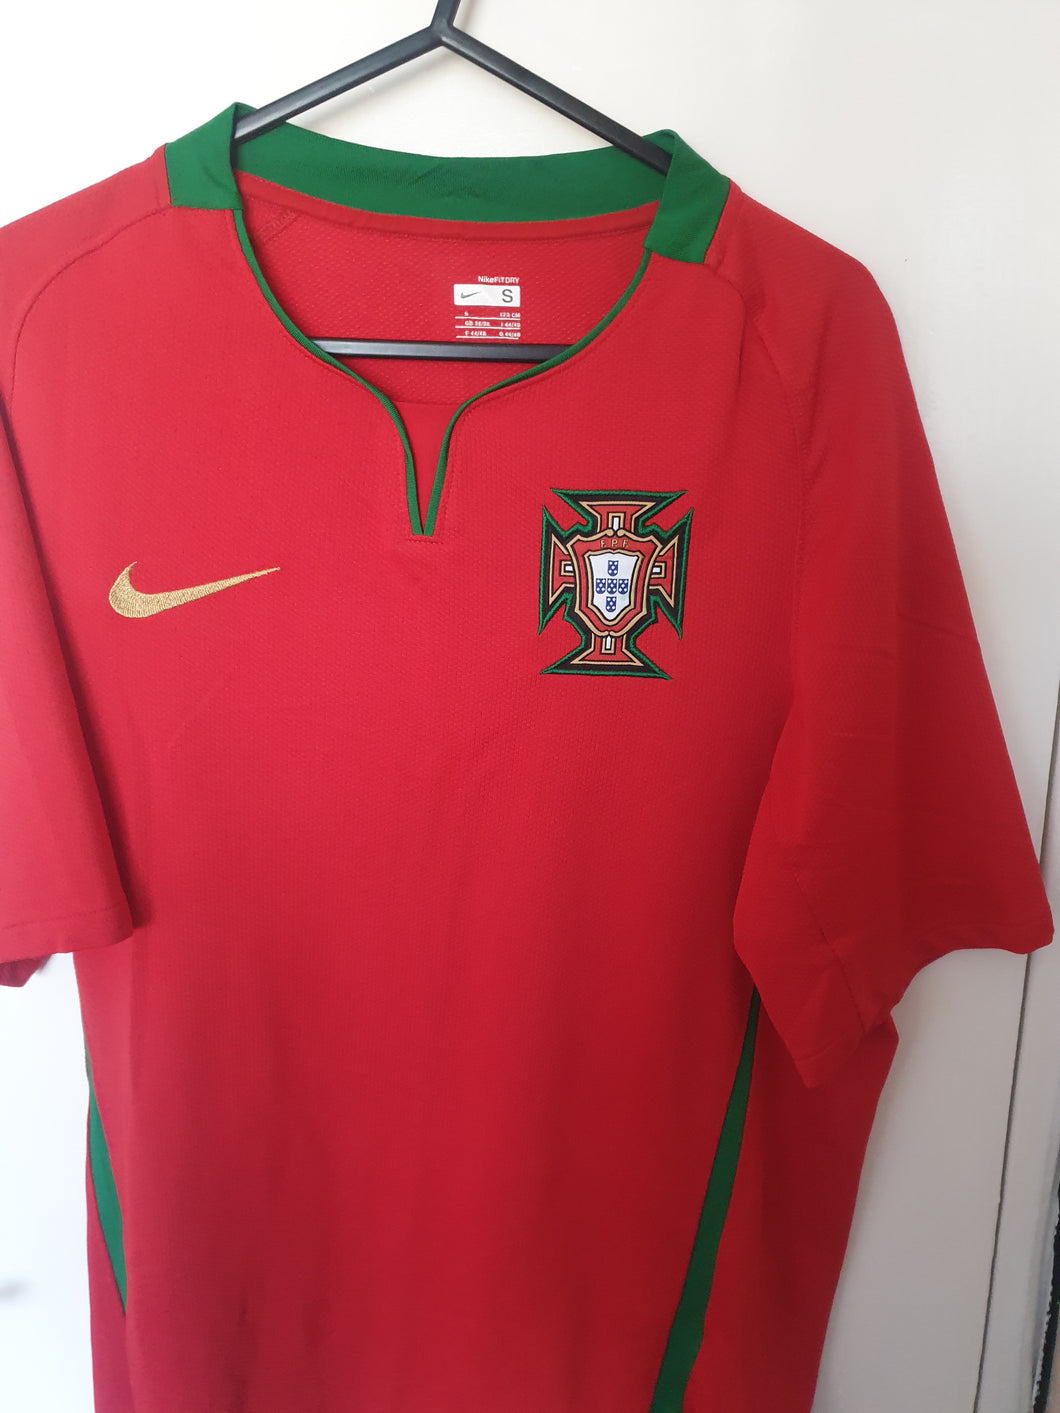 Portugal 2008-2009 Home Shirt (Size Small)